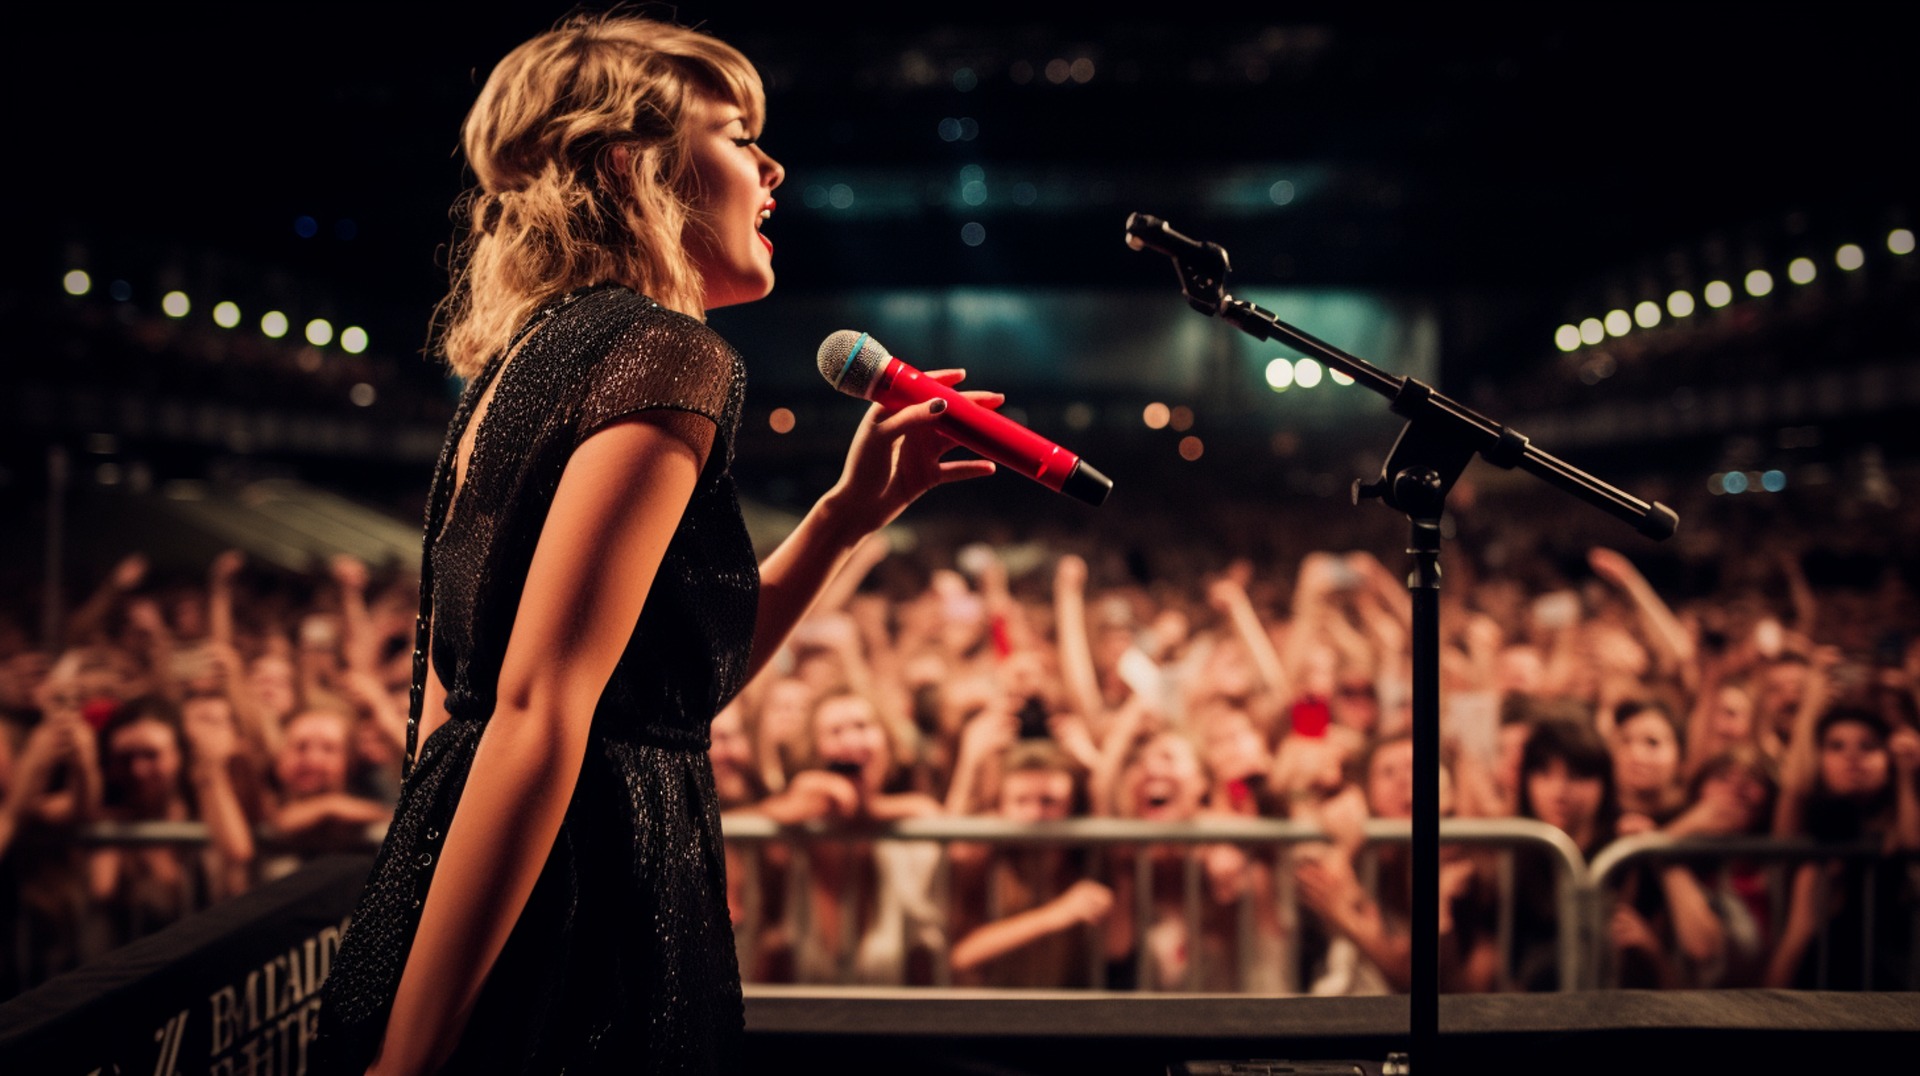 Win a Ticket to Taylor Swift’s Concert at Bedok’s Youth Festival